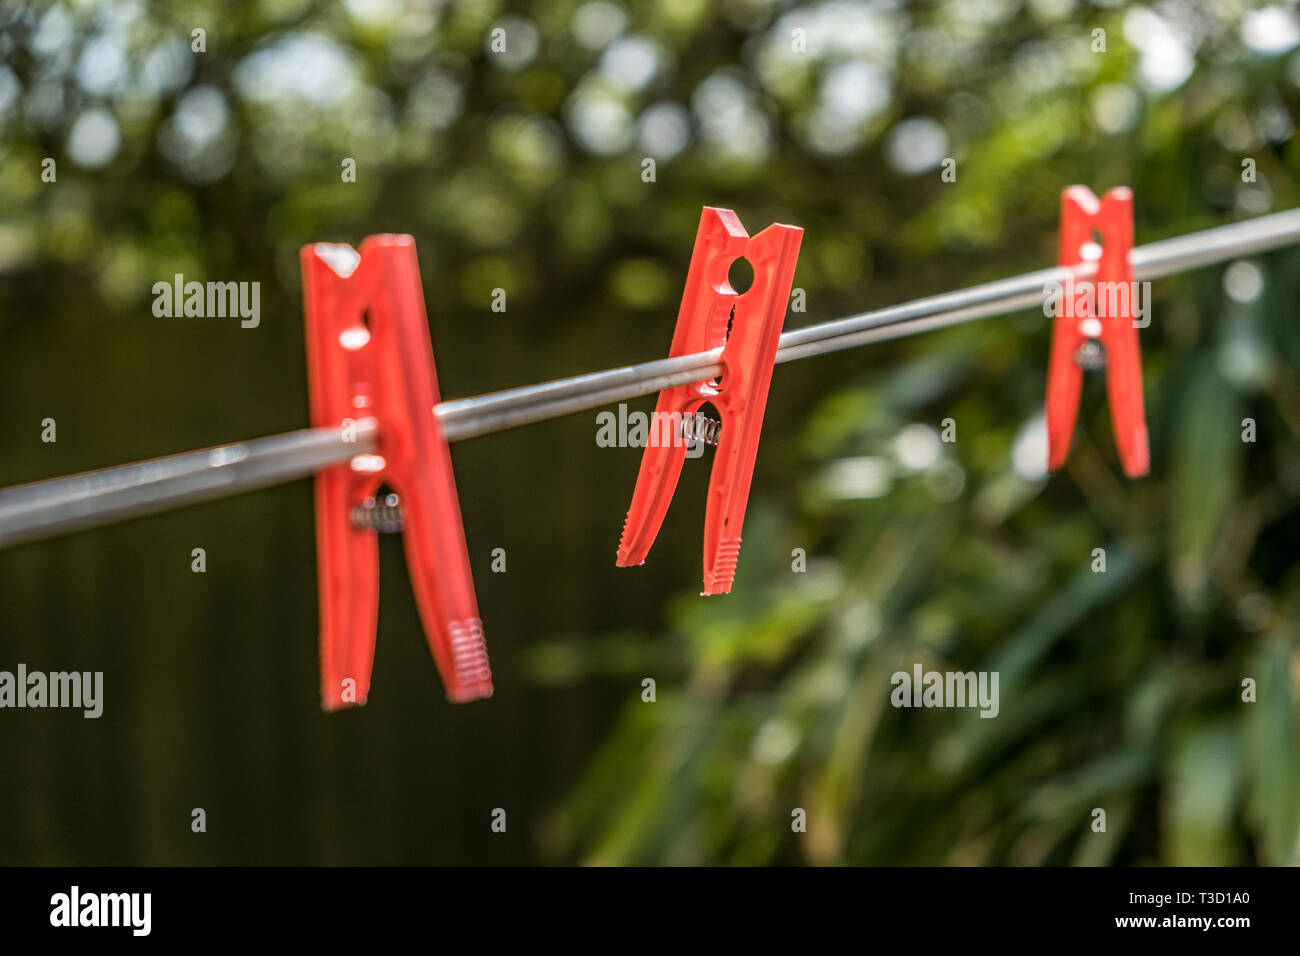 Three red plastic clothes pegs on a clothes line against the background of blurred green bush. Stock Photo